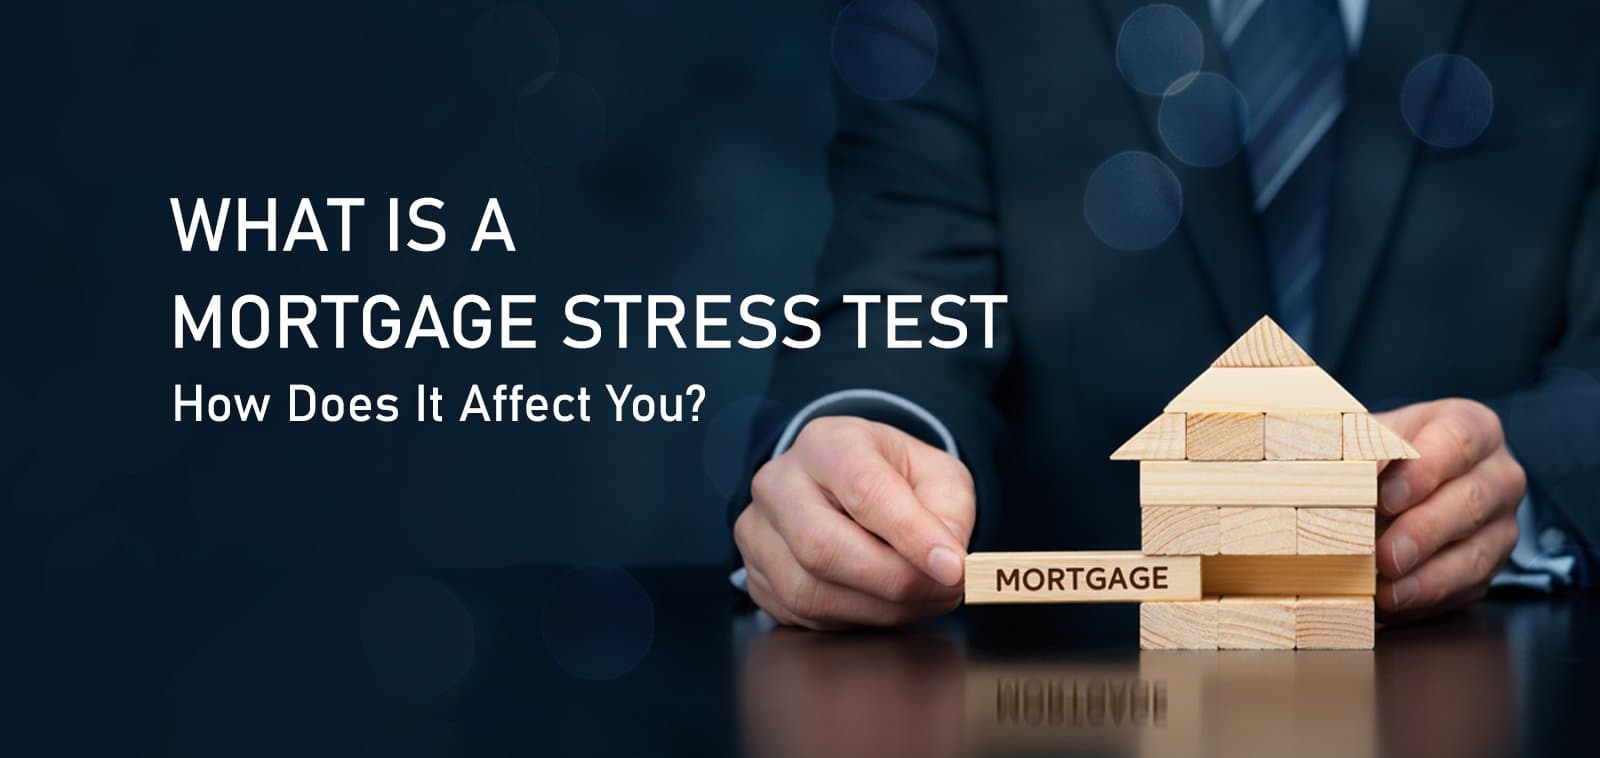 What Is a Mortgage Stress Test and How Does It Affect You?